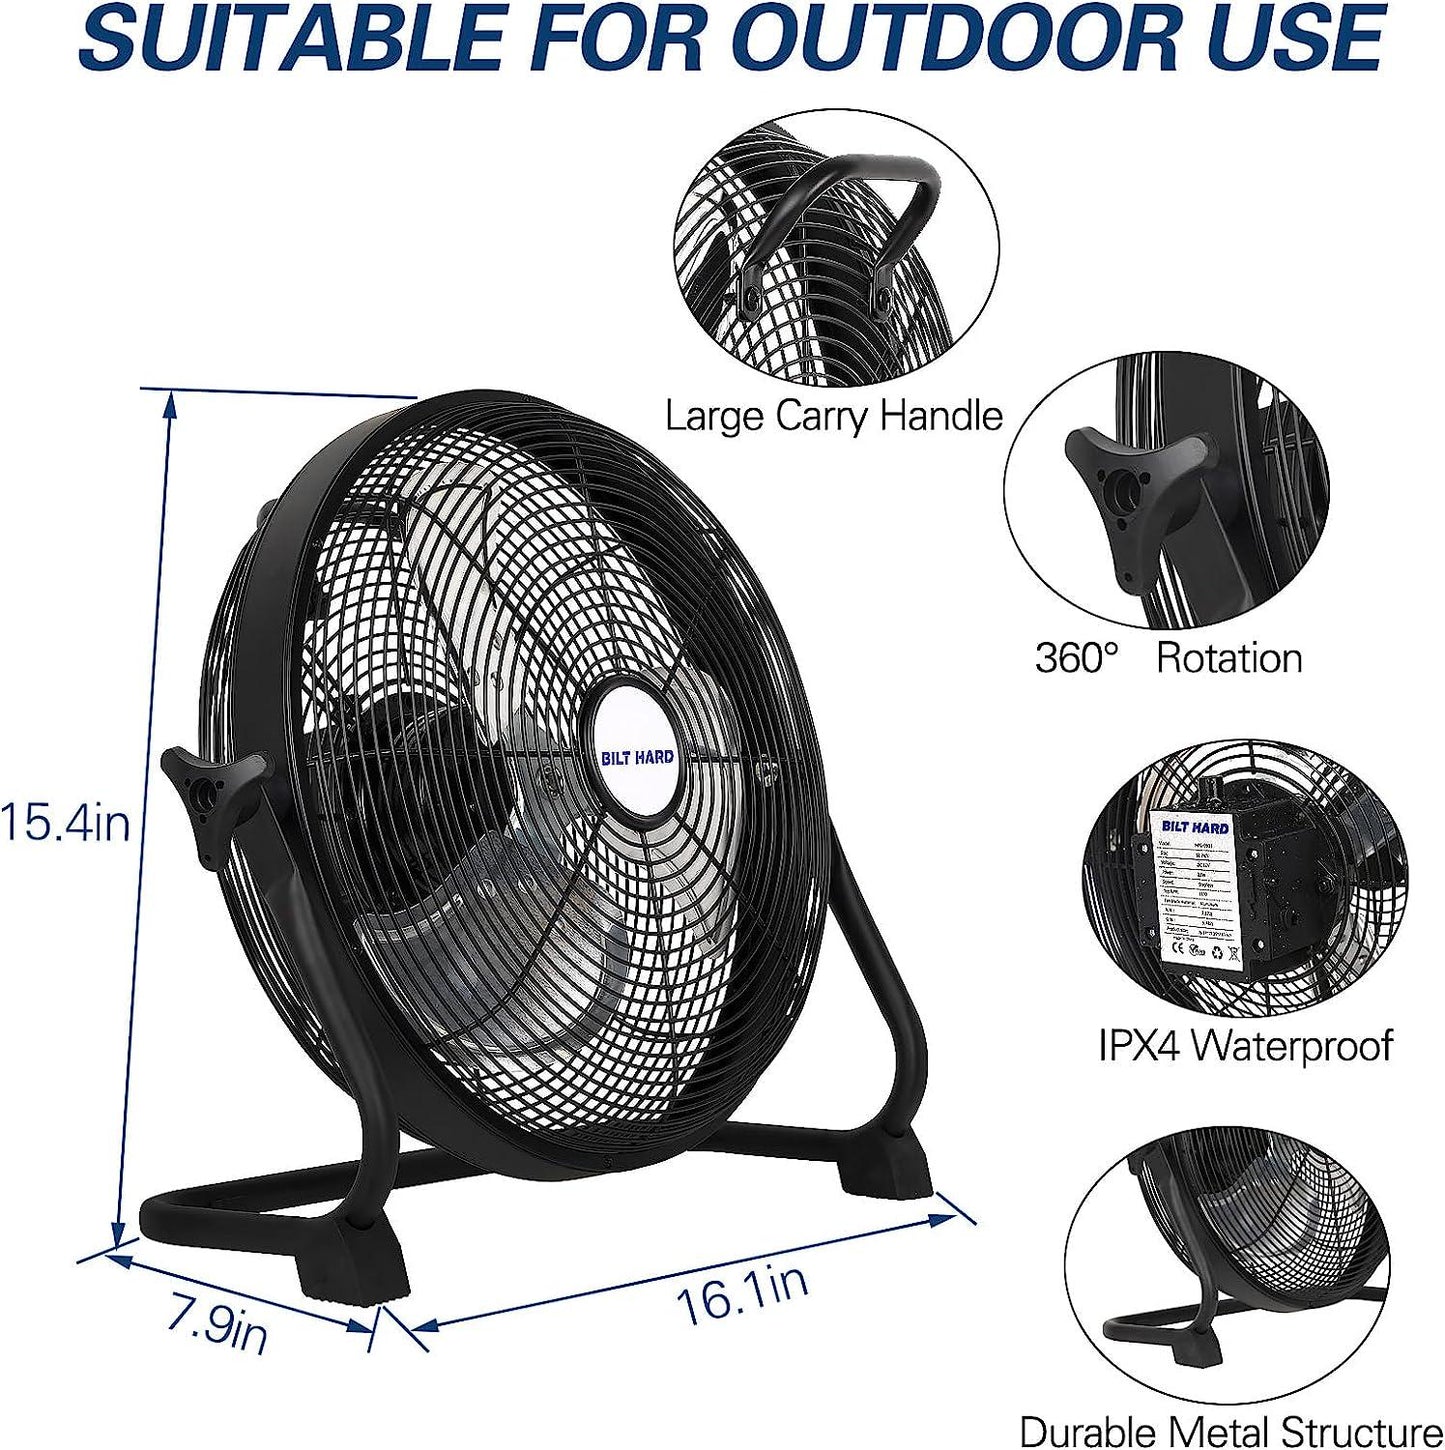 12 Rechargeable Battery Operated Outdoor Floor Fan, 15600mAh Battery Powered High Velocity Portable Fan with Metal Blade, USB Output